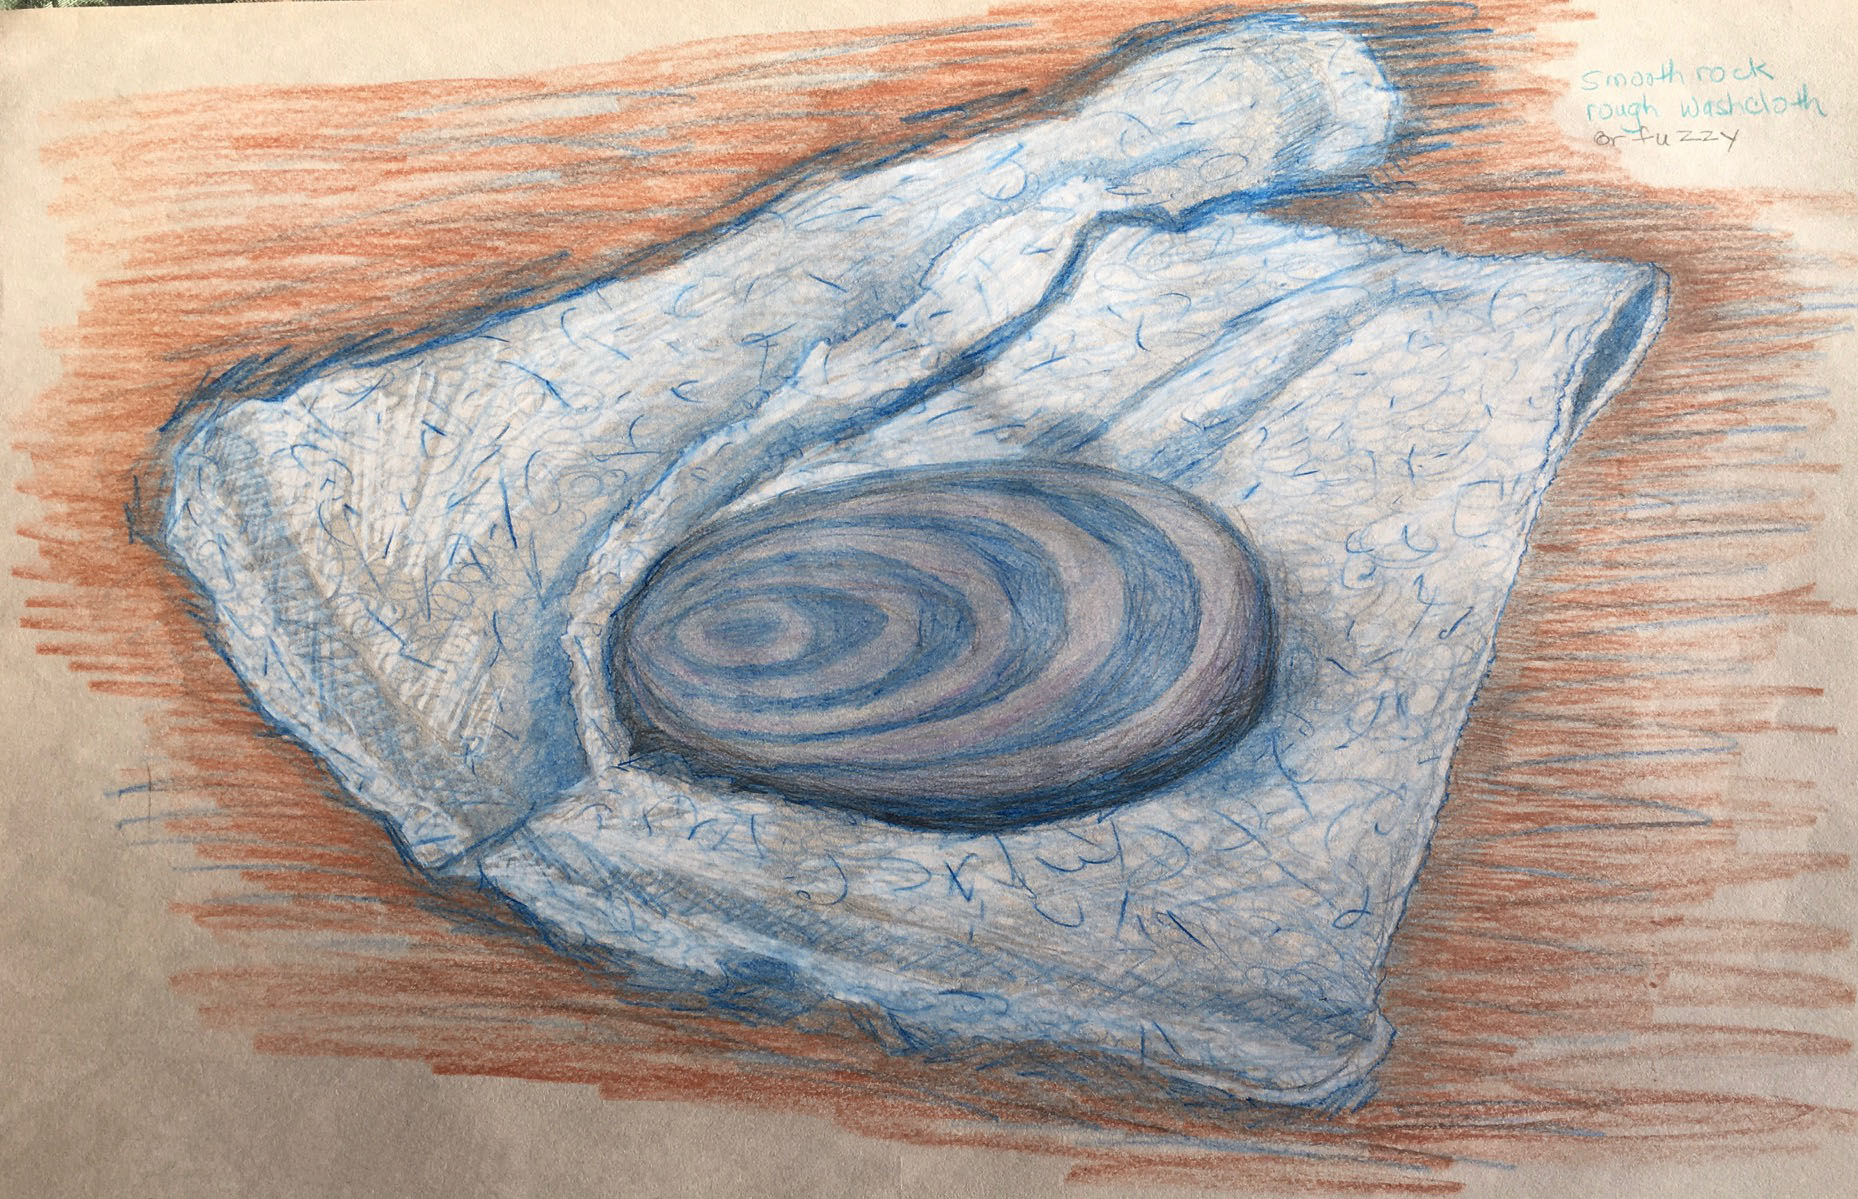 Rock and Washcloth, 2018
Colored Pencils on Paper
22.5"W x 14.5"H, Walli White, artist